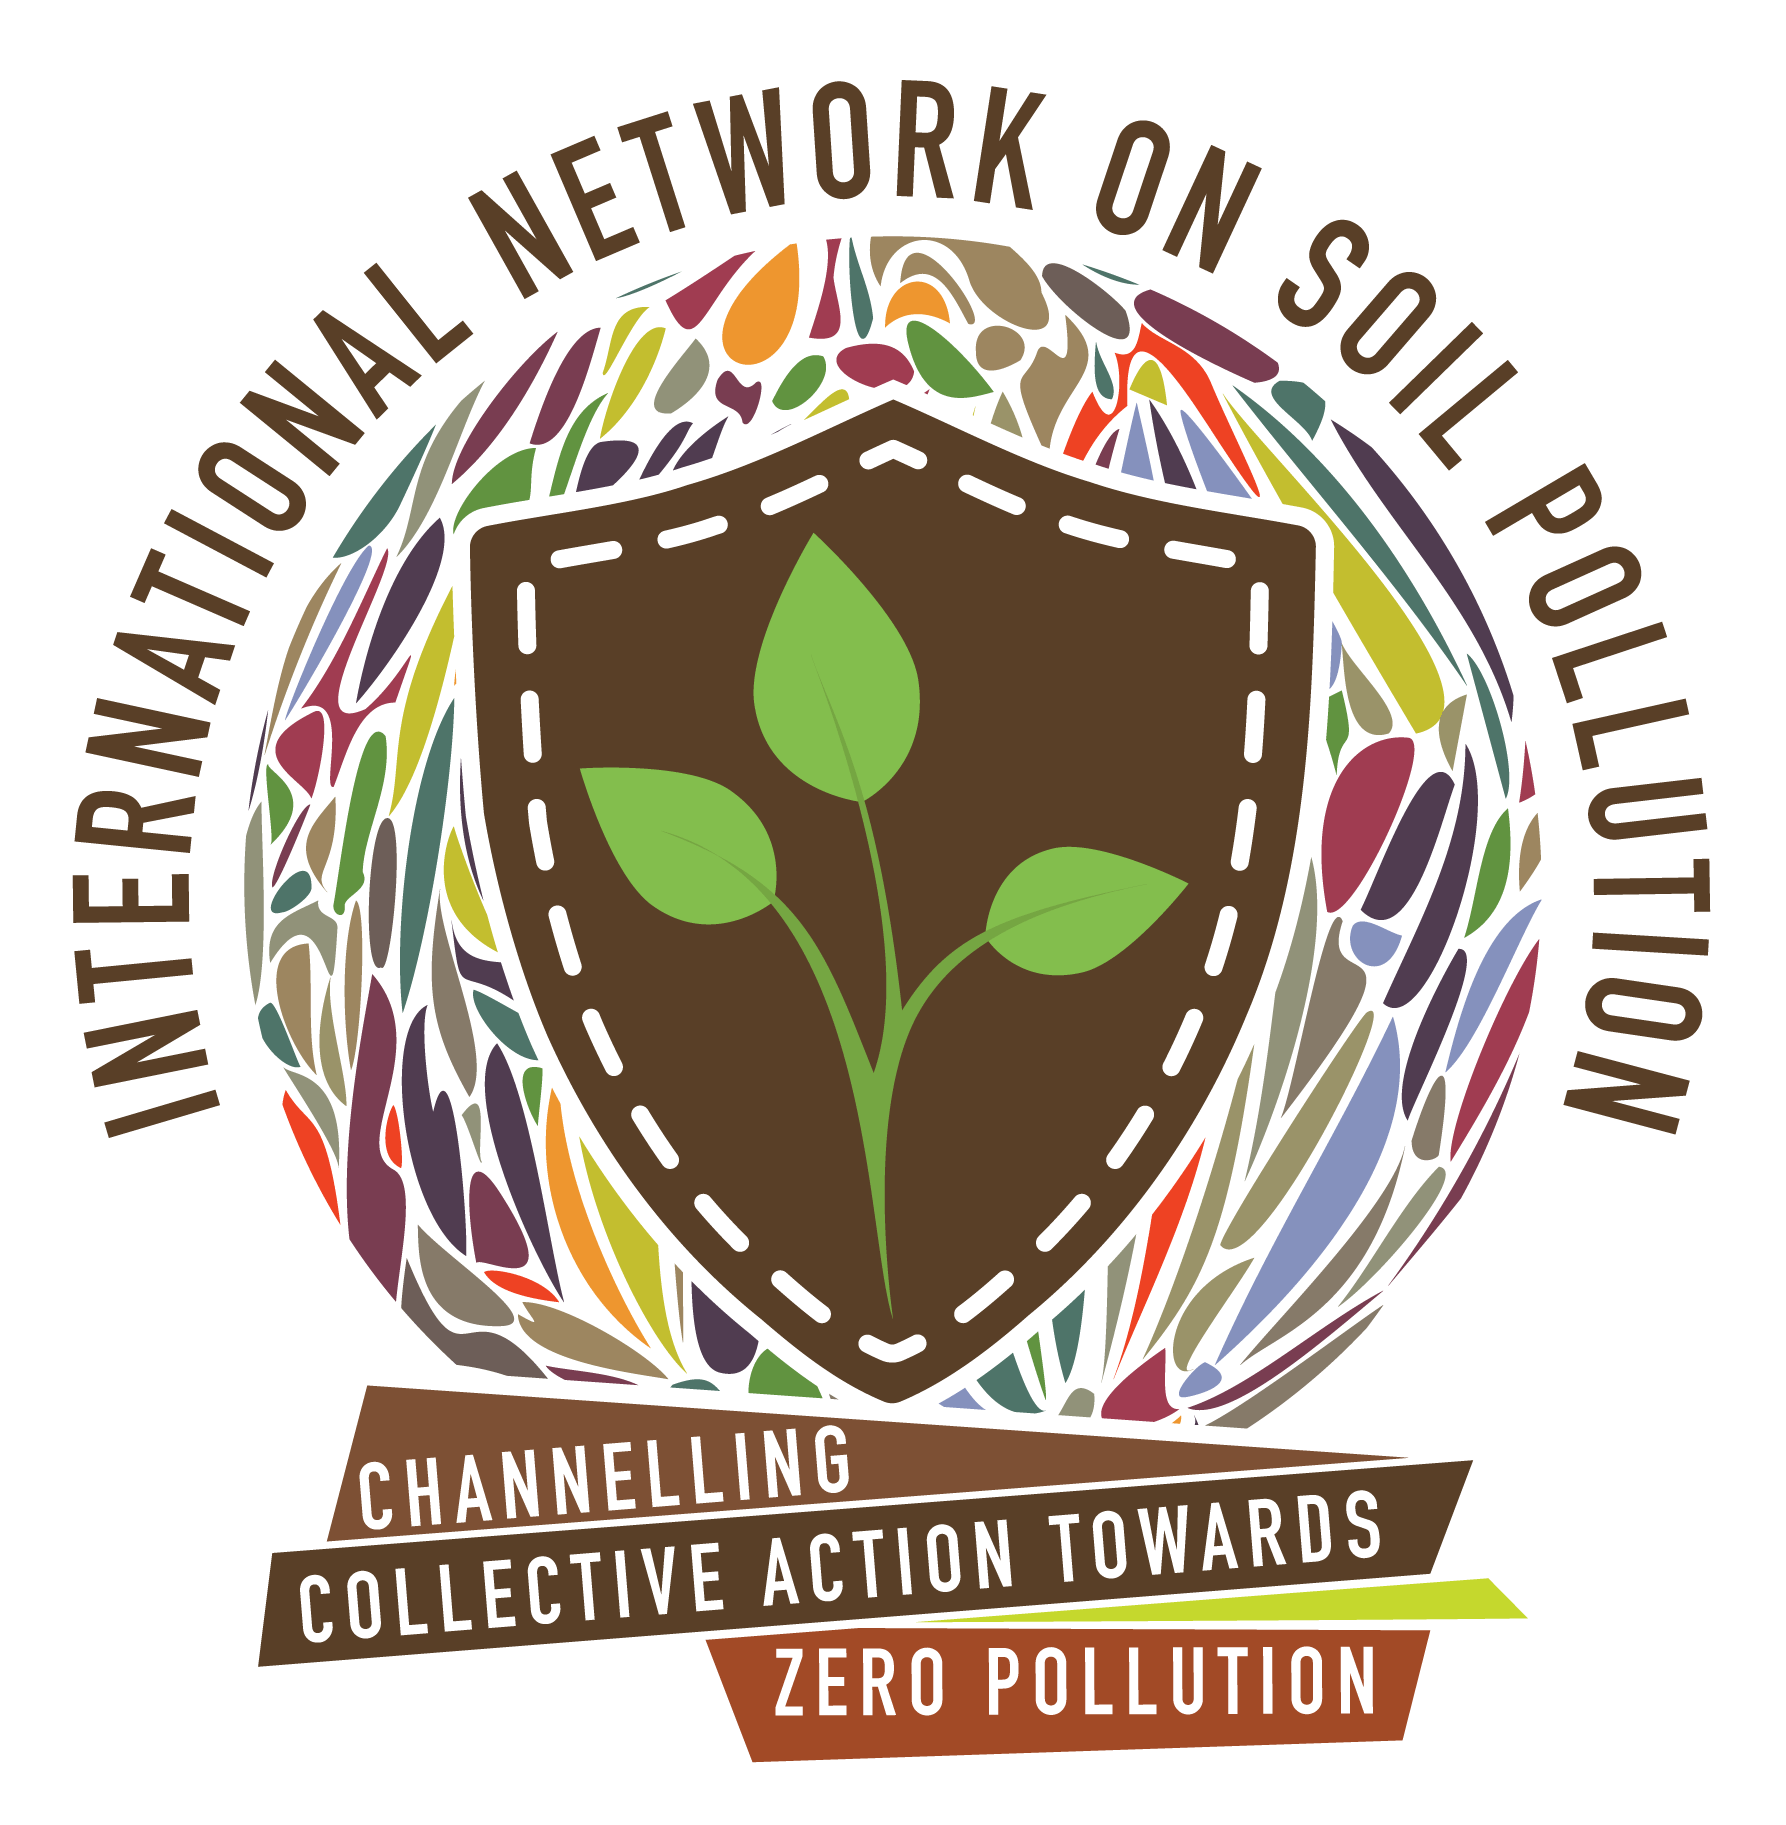 Launch of the International Network on Soil Pollution (INSOP